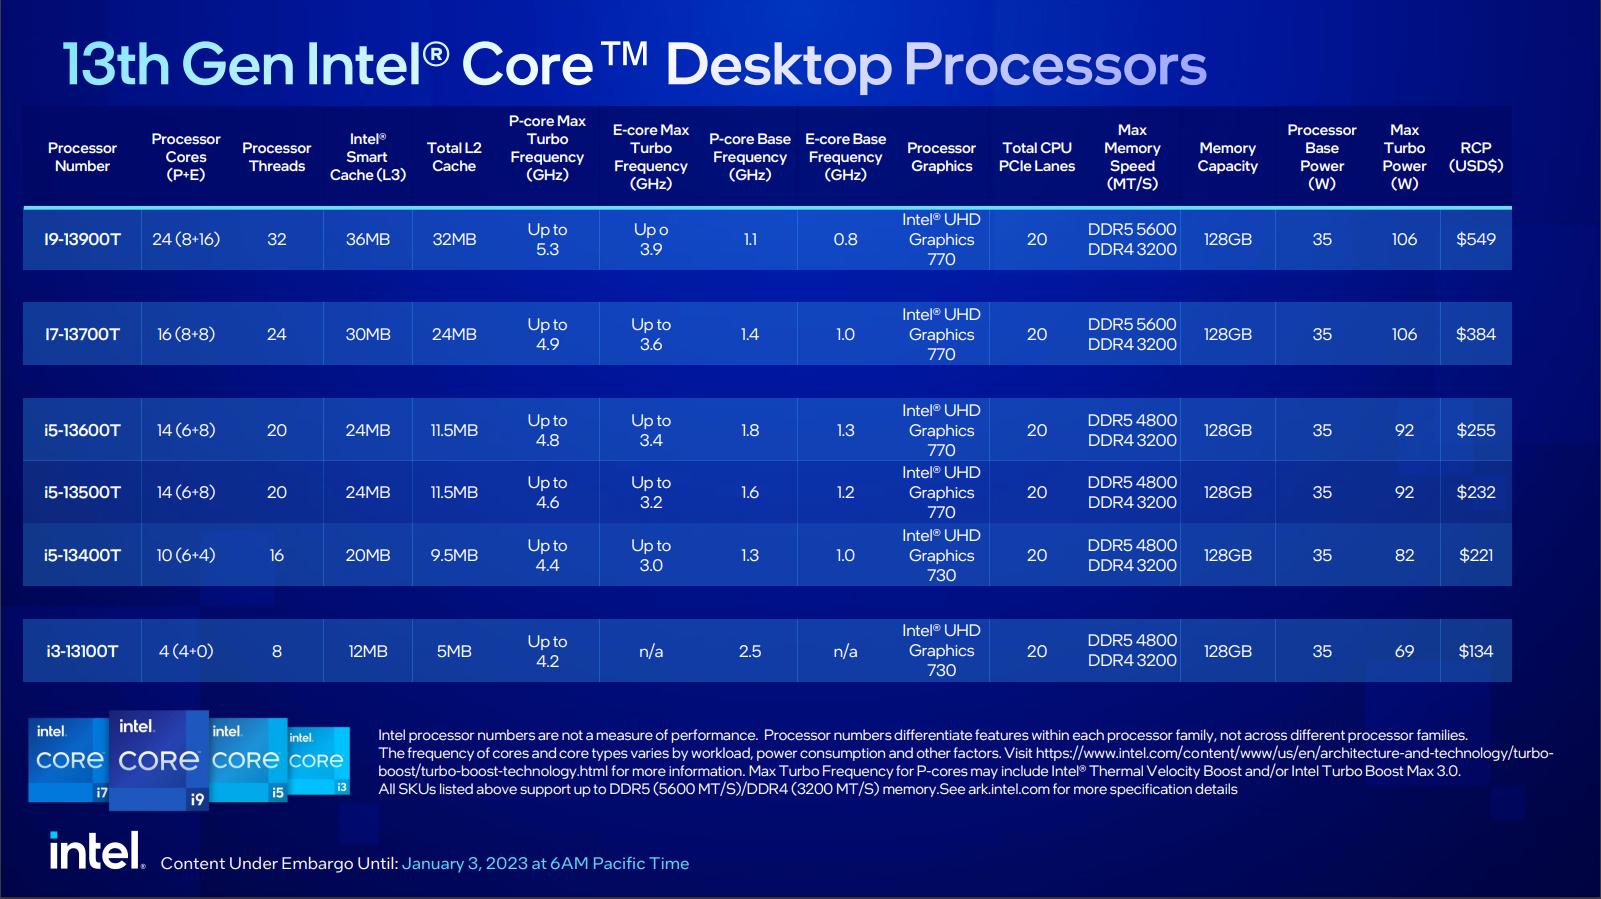 Intel has expanded the range of desktop Core processors of the 13th generation